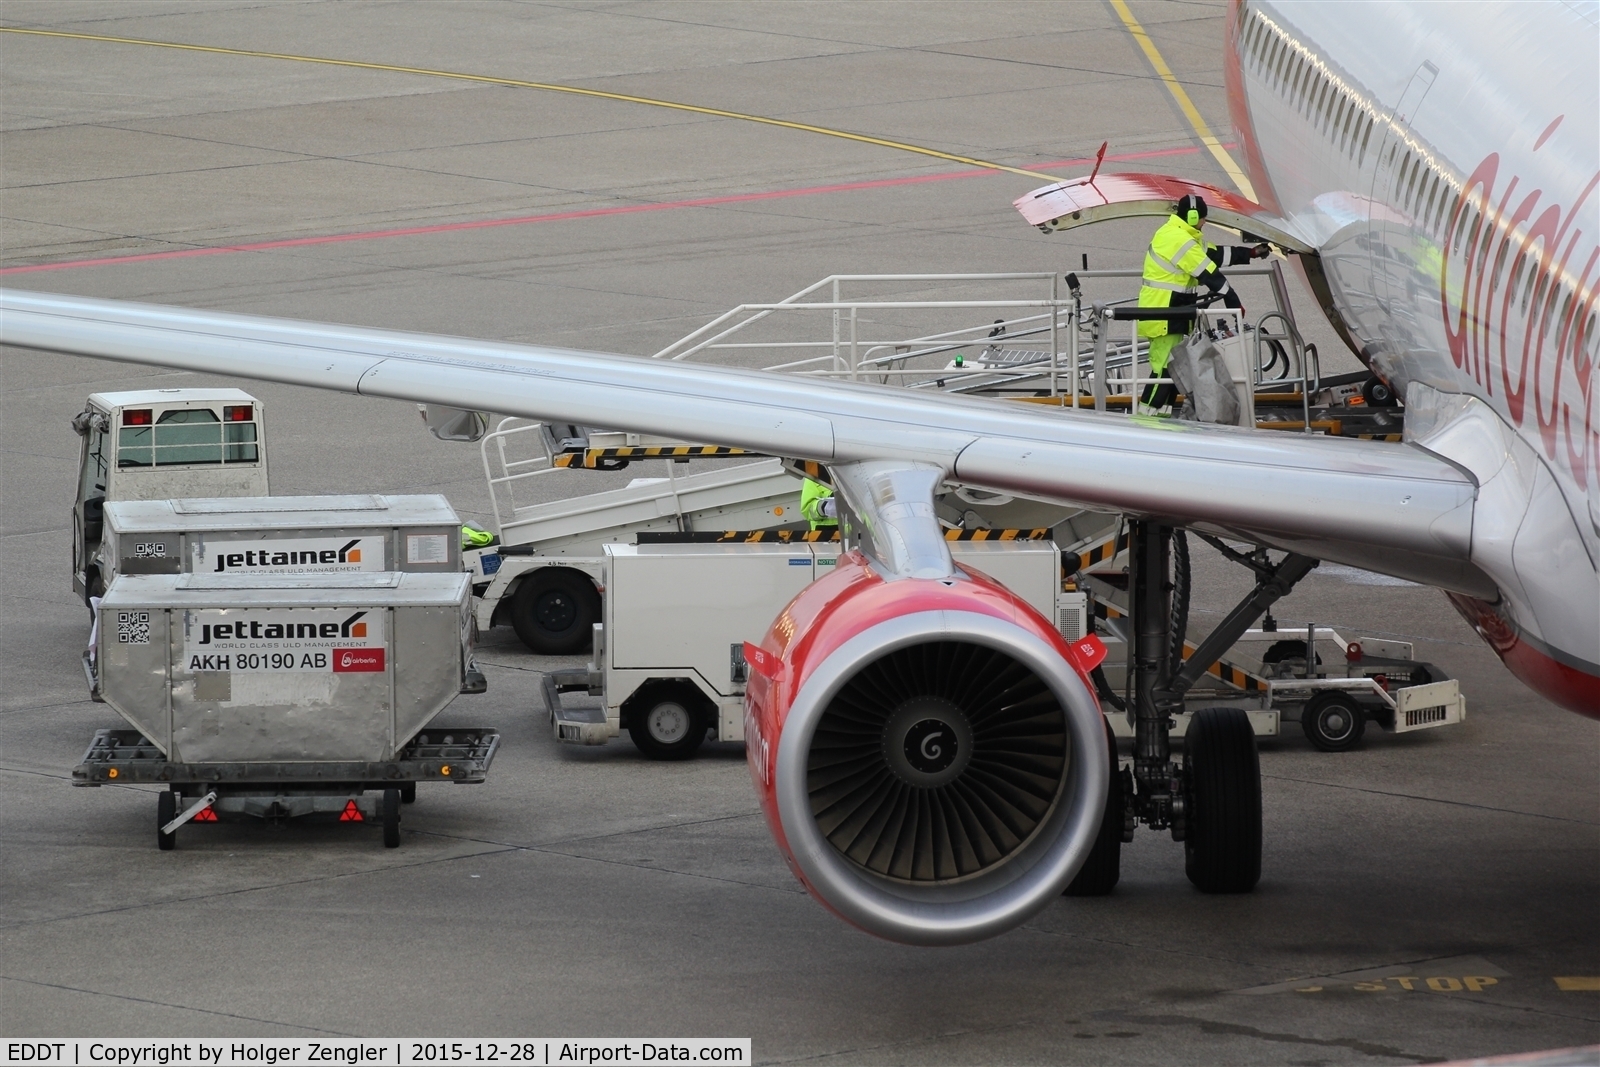 Tegel International Airport (closing in 2011), Berlin Germany (EDDT) - Business as usual on apron.....